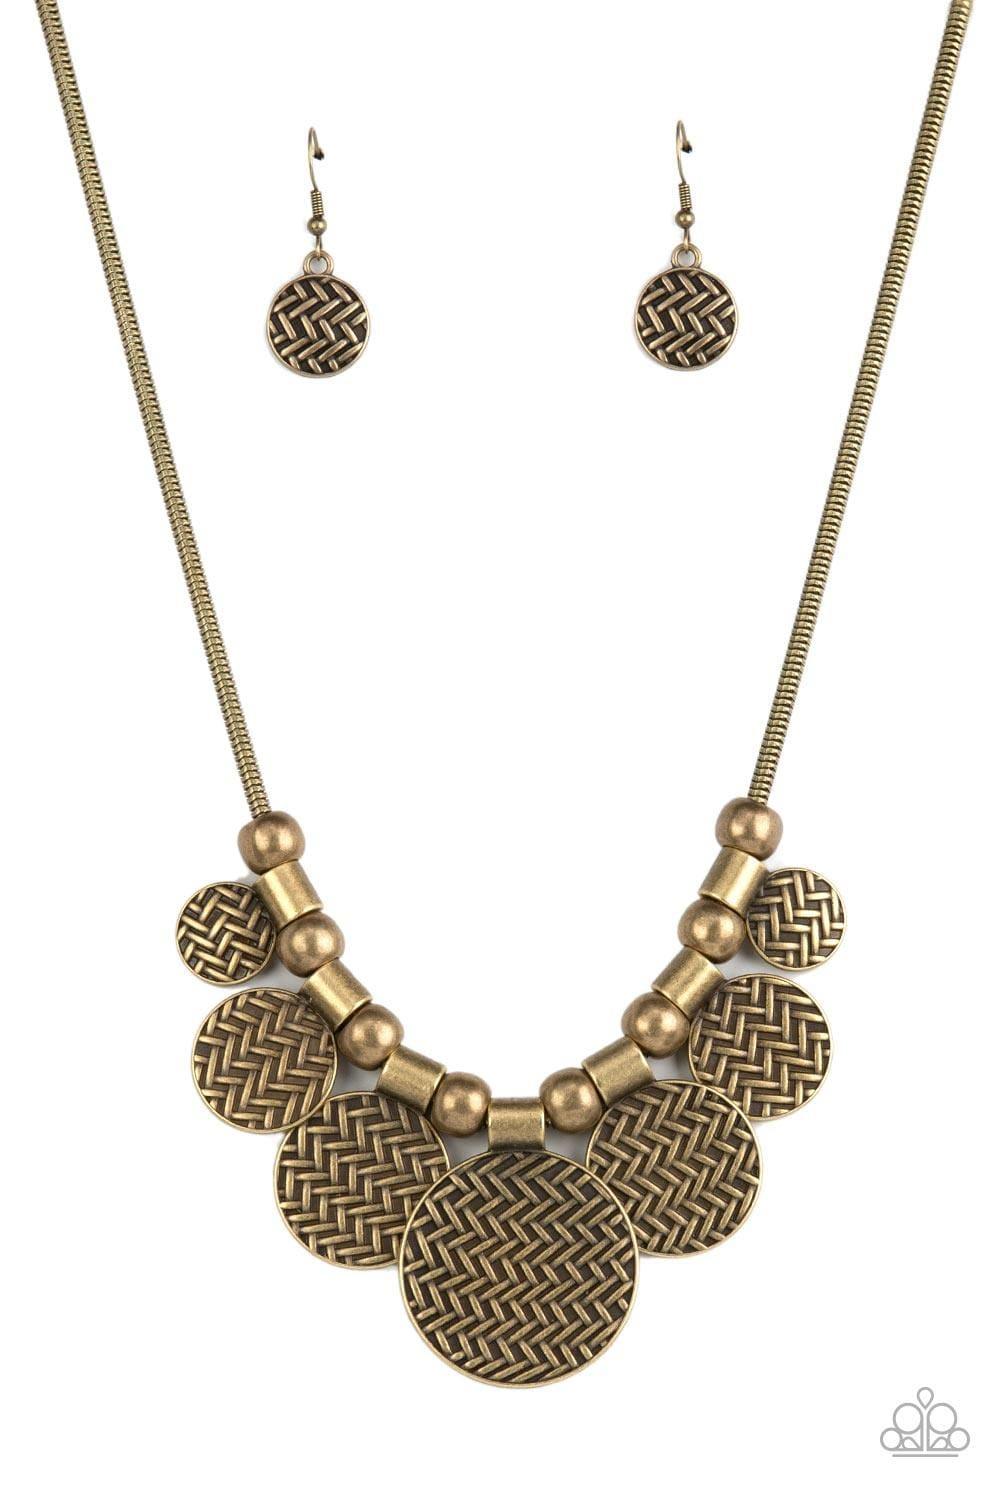 Paparazzi Accessories - Indigenously Urban - Brass Necklace - Bling by JessieK